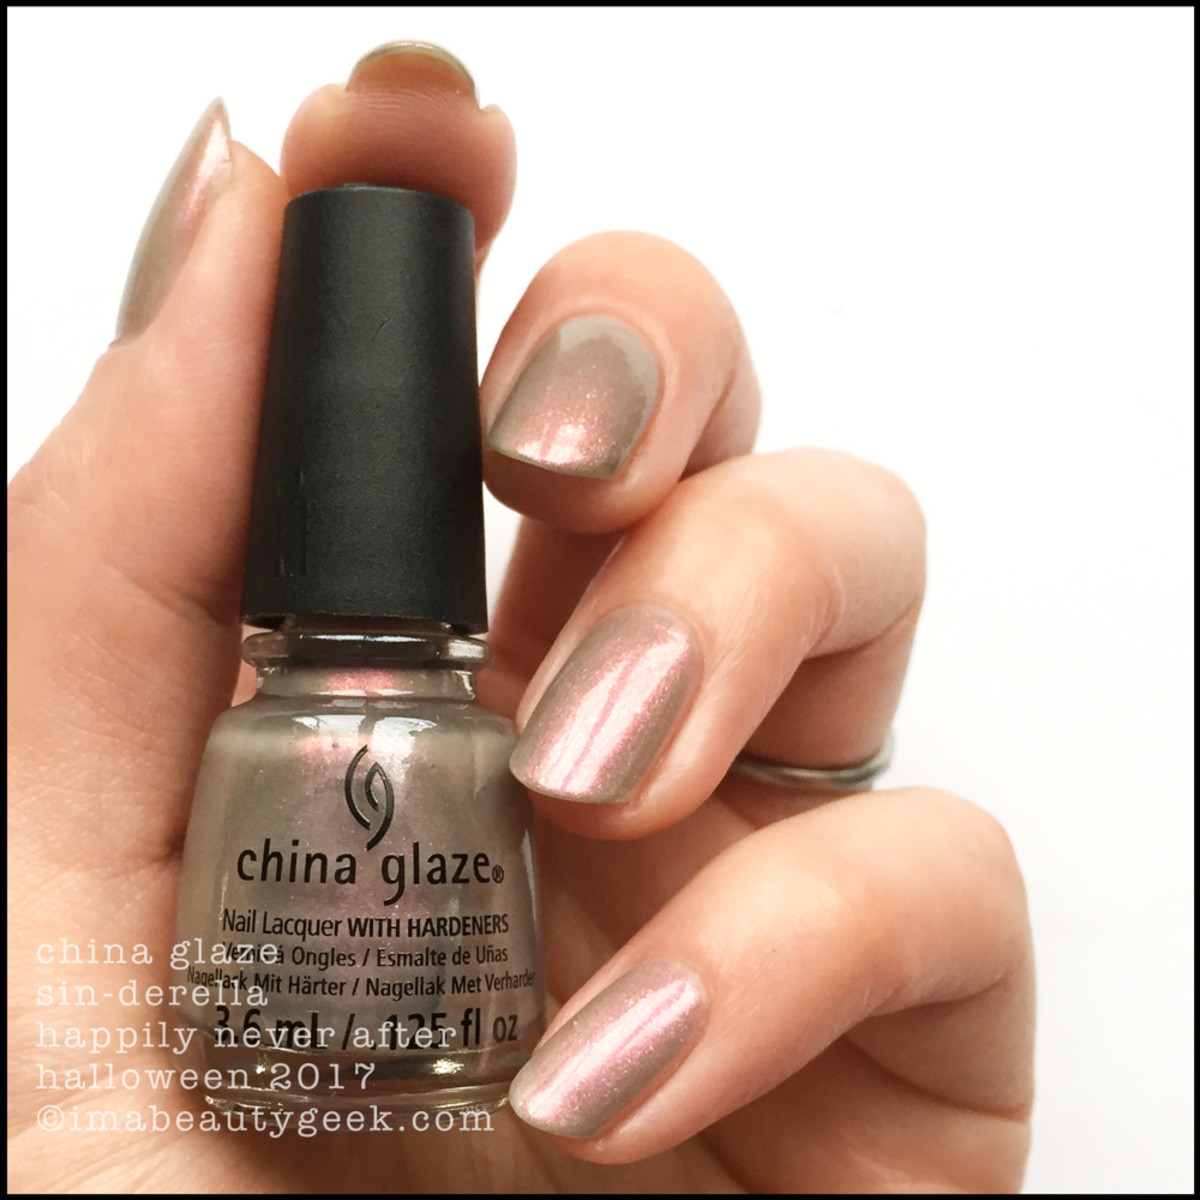 China Glaze Sin-derella _ China Glaze Happily Never After Collection Halloween 2017